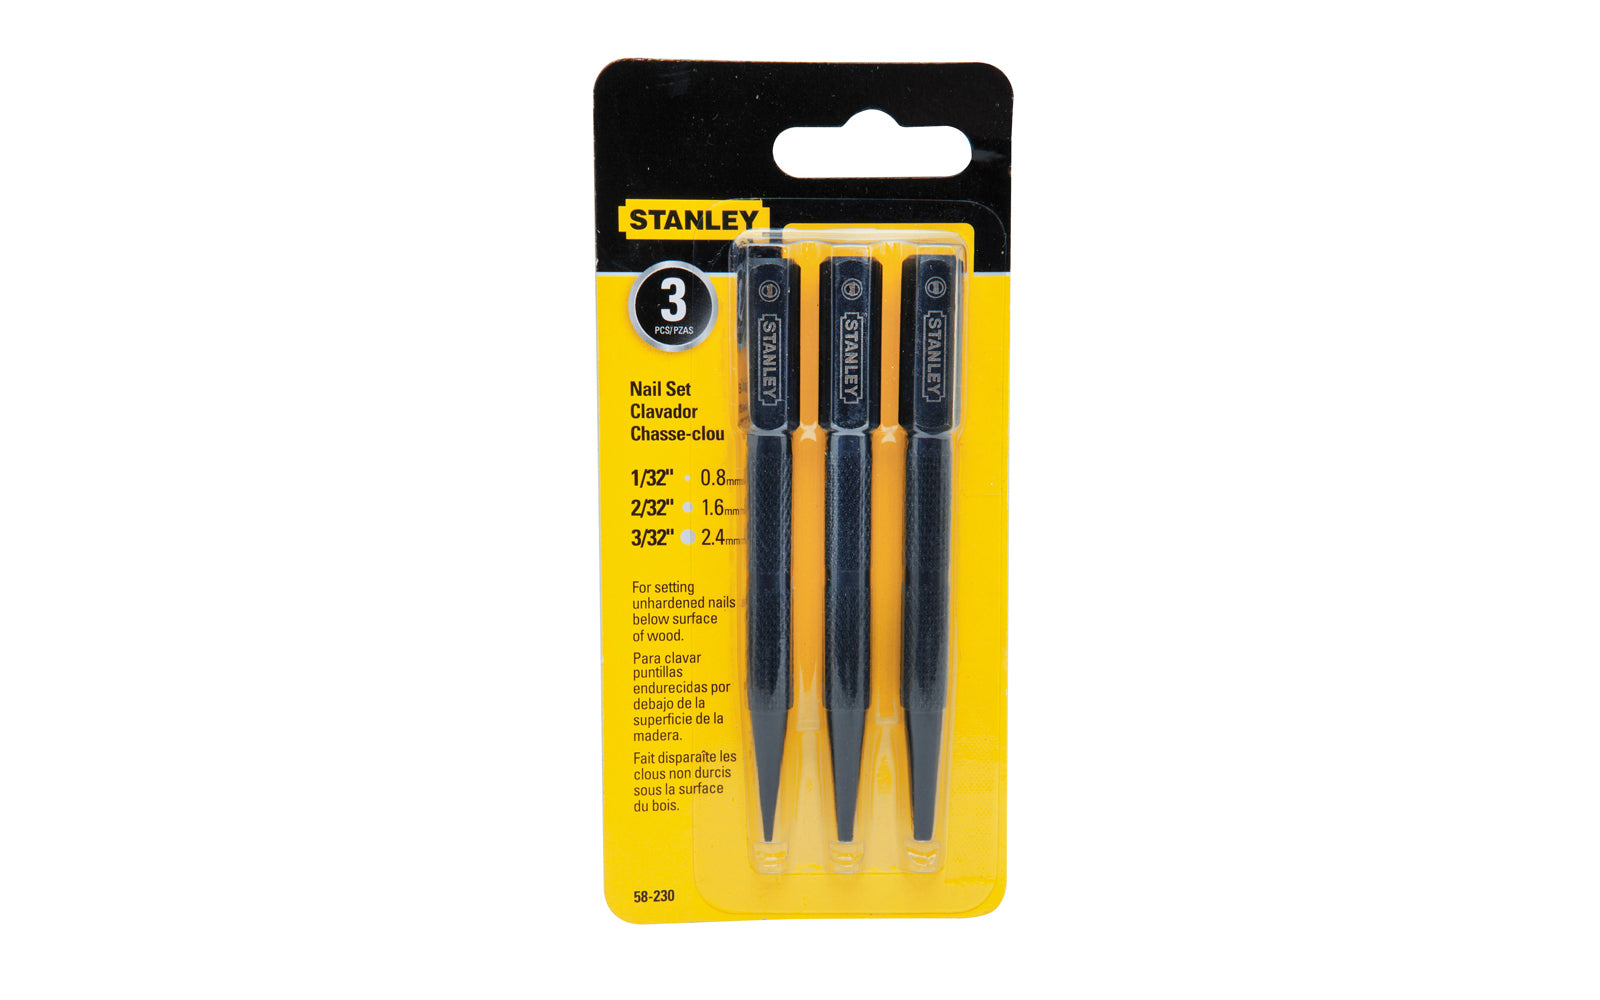 Model 58-230 ~ Three-piece nail set made by Stanley Tools, designed for setting unhardened nails below surface of wood. Sizes included are 1/32", 1/16", & 3/32". They are fully hardened & precision-milled steel for long life, & have long beveled tips for easy nail head alignment. 1/32", 2/32", 3/32" sizes. 076174582307